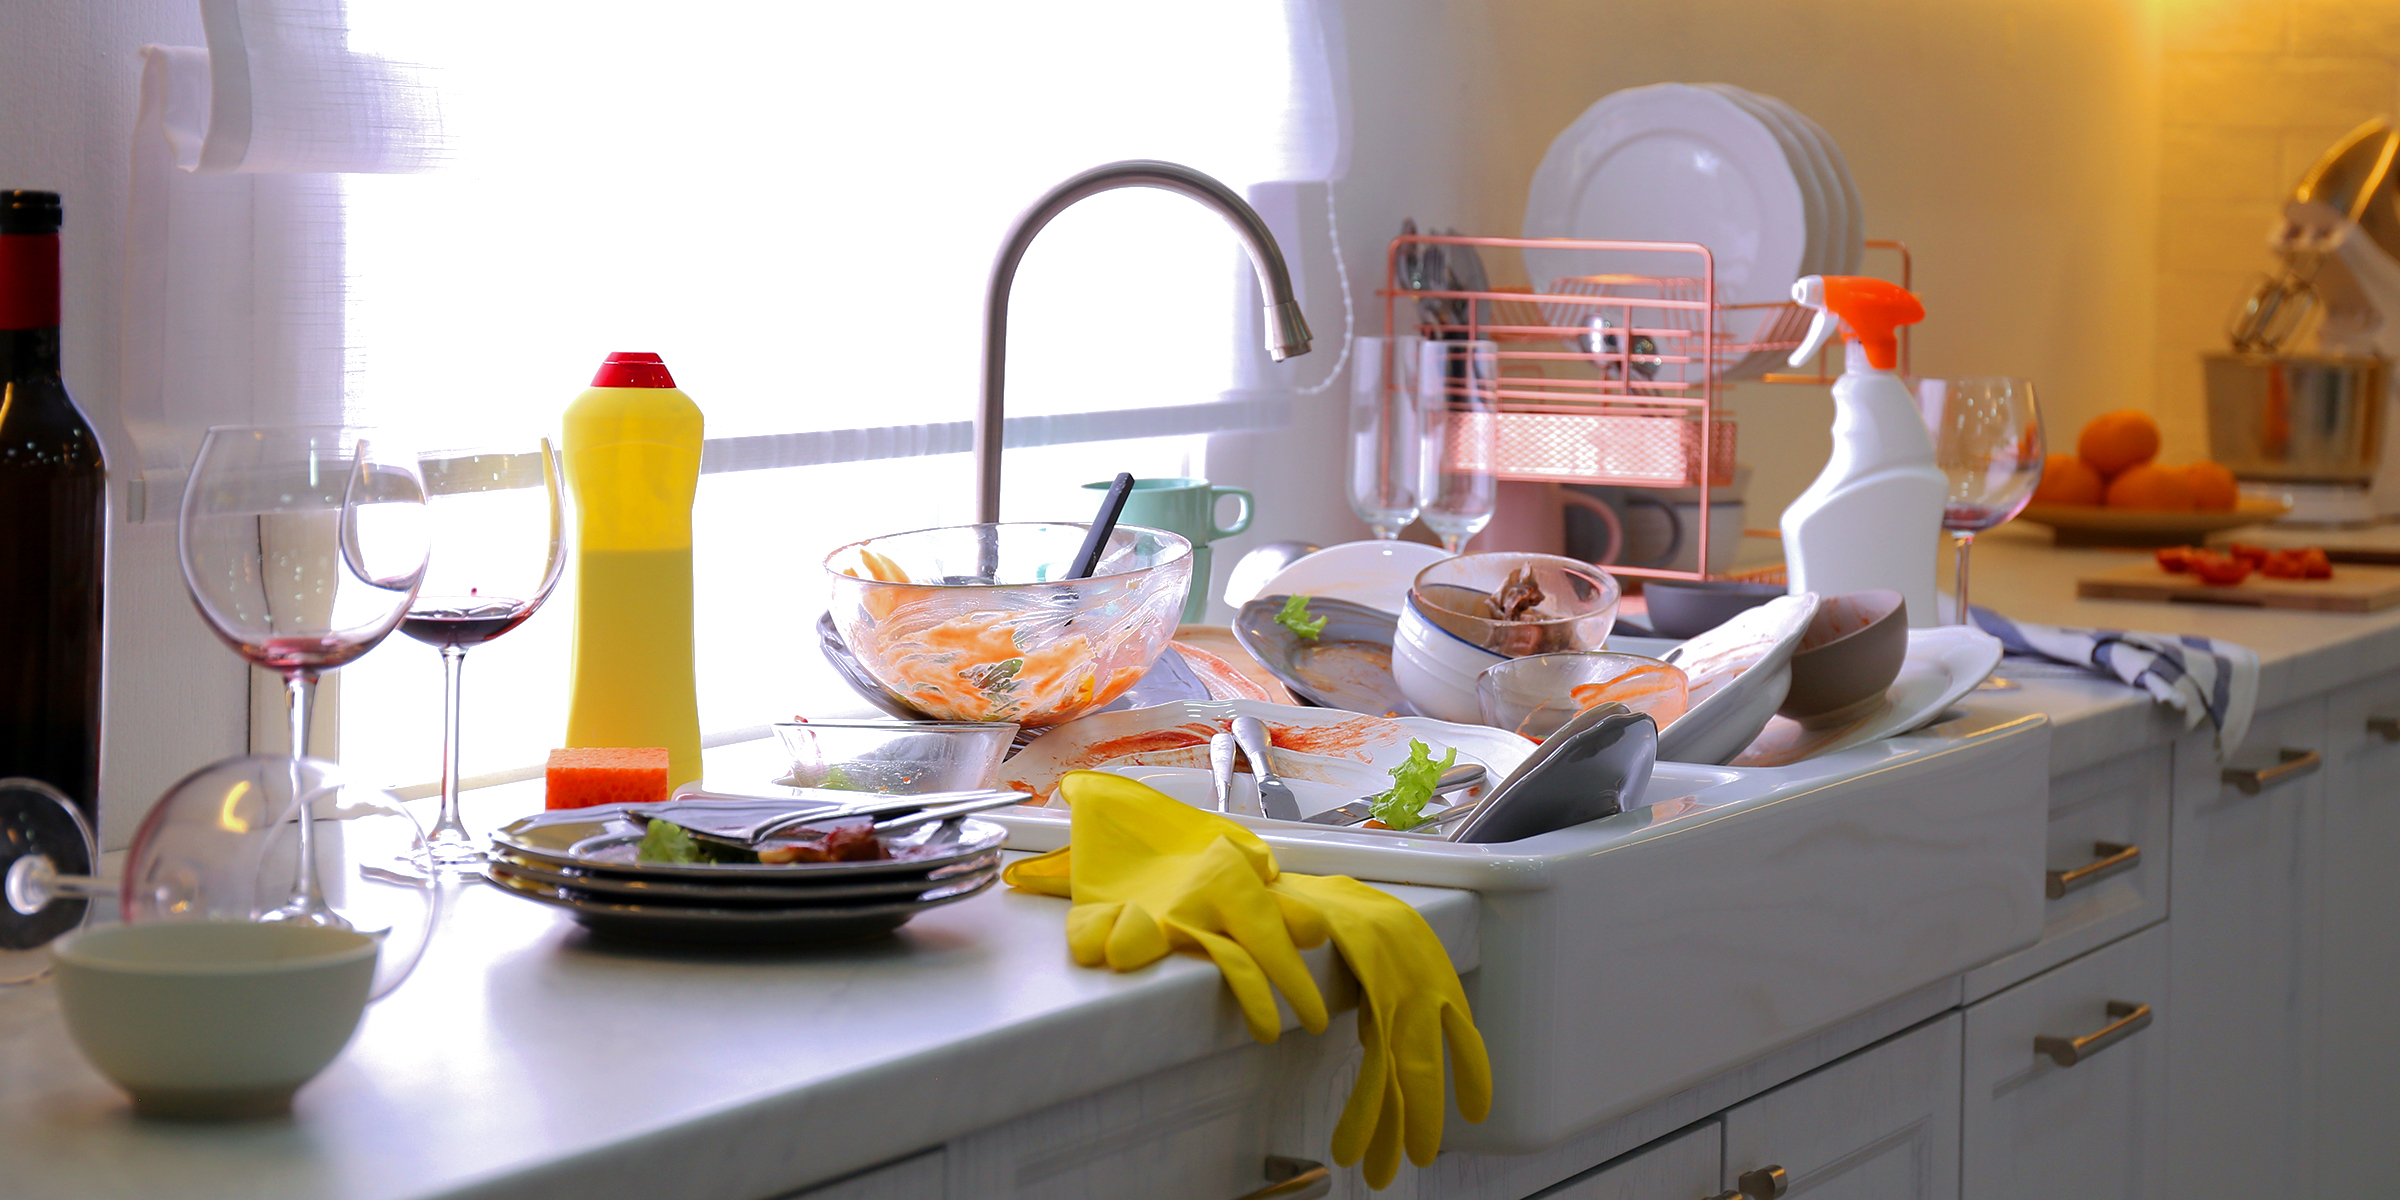 Dirty dishes piled up on a kitchen counter | Source: Shutterstock